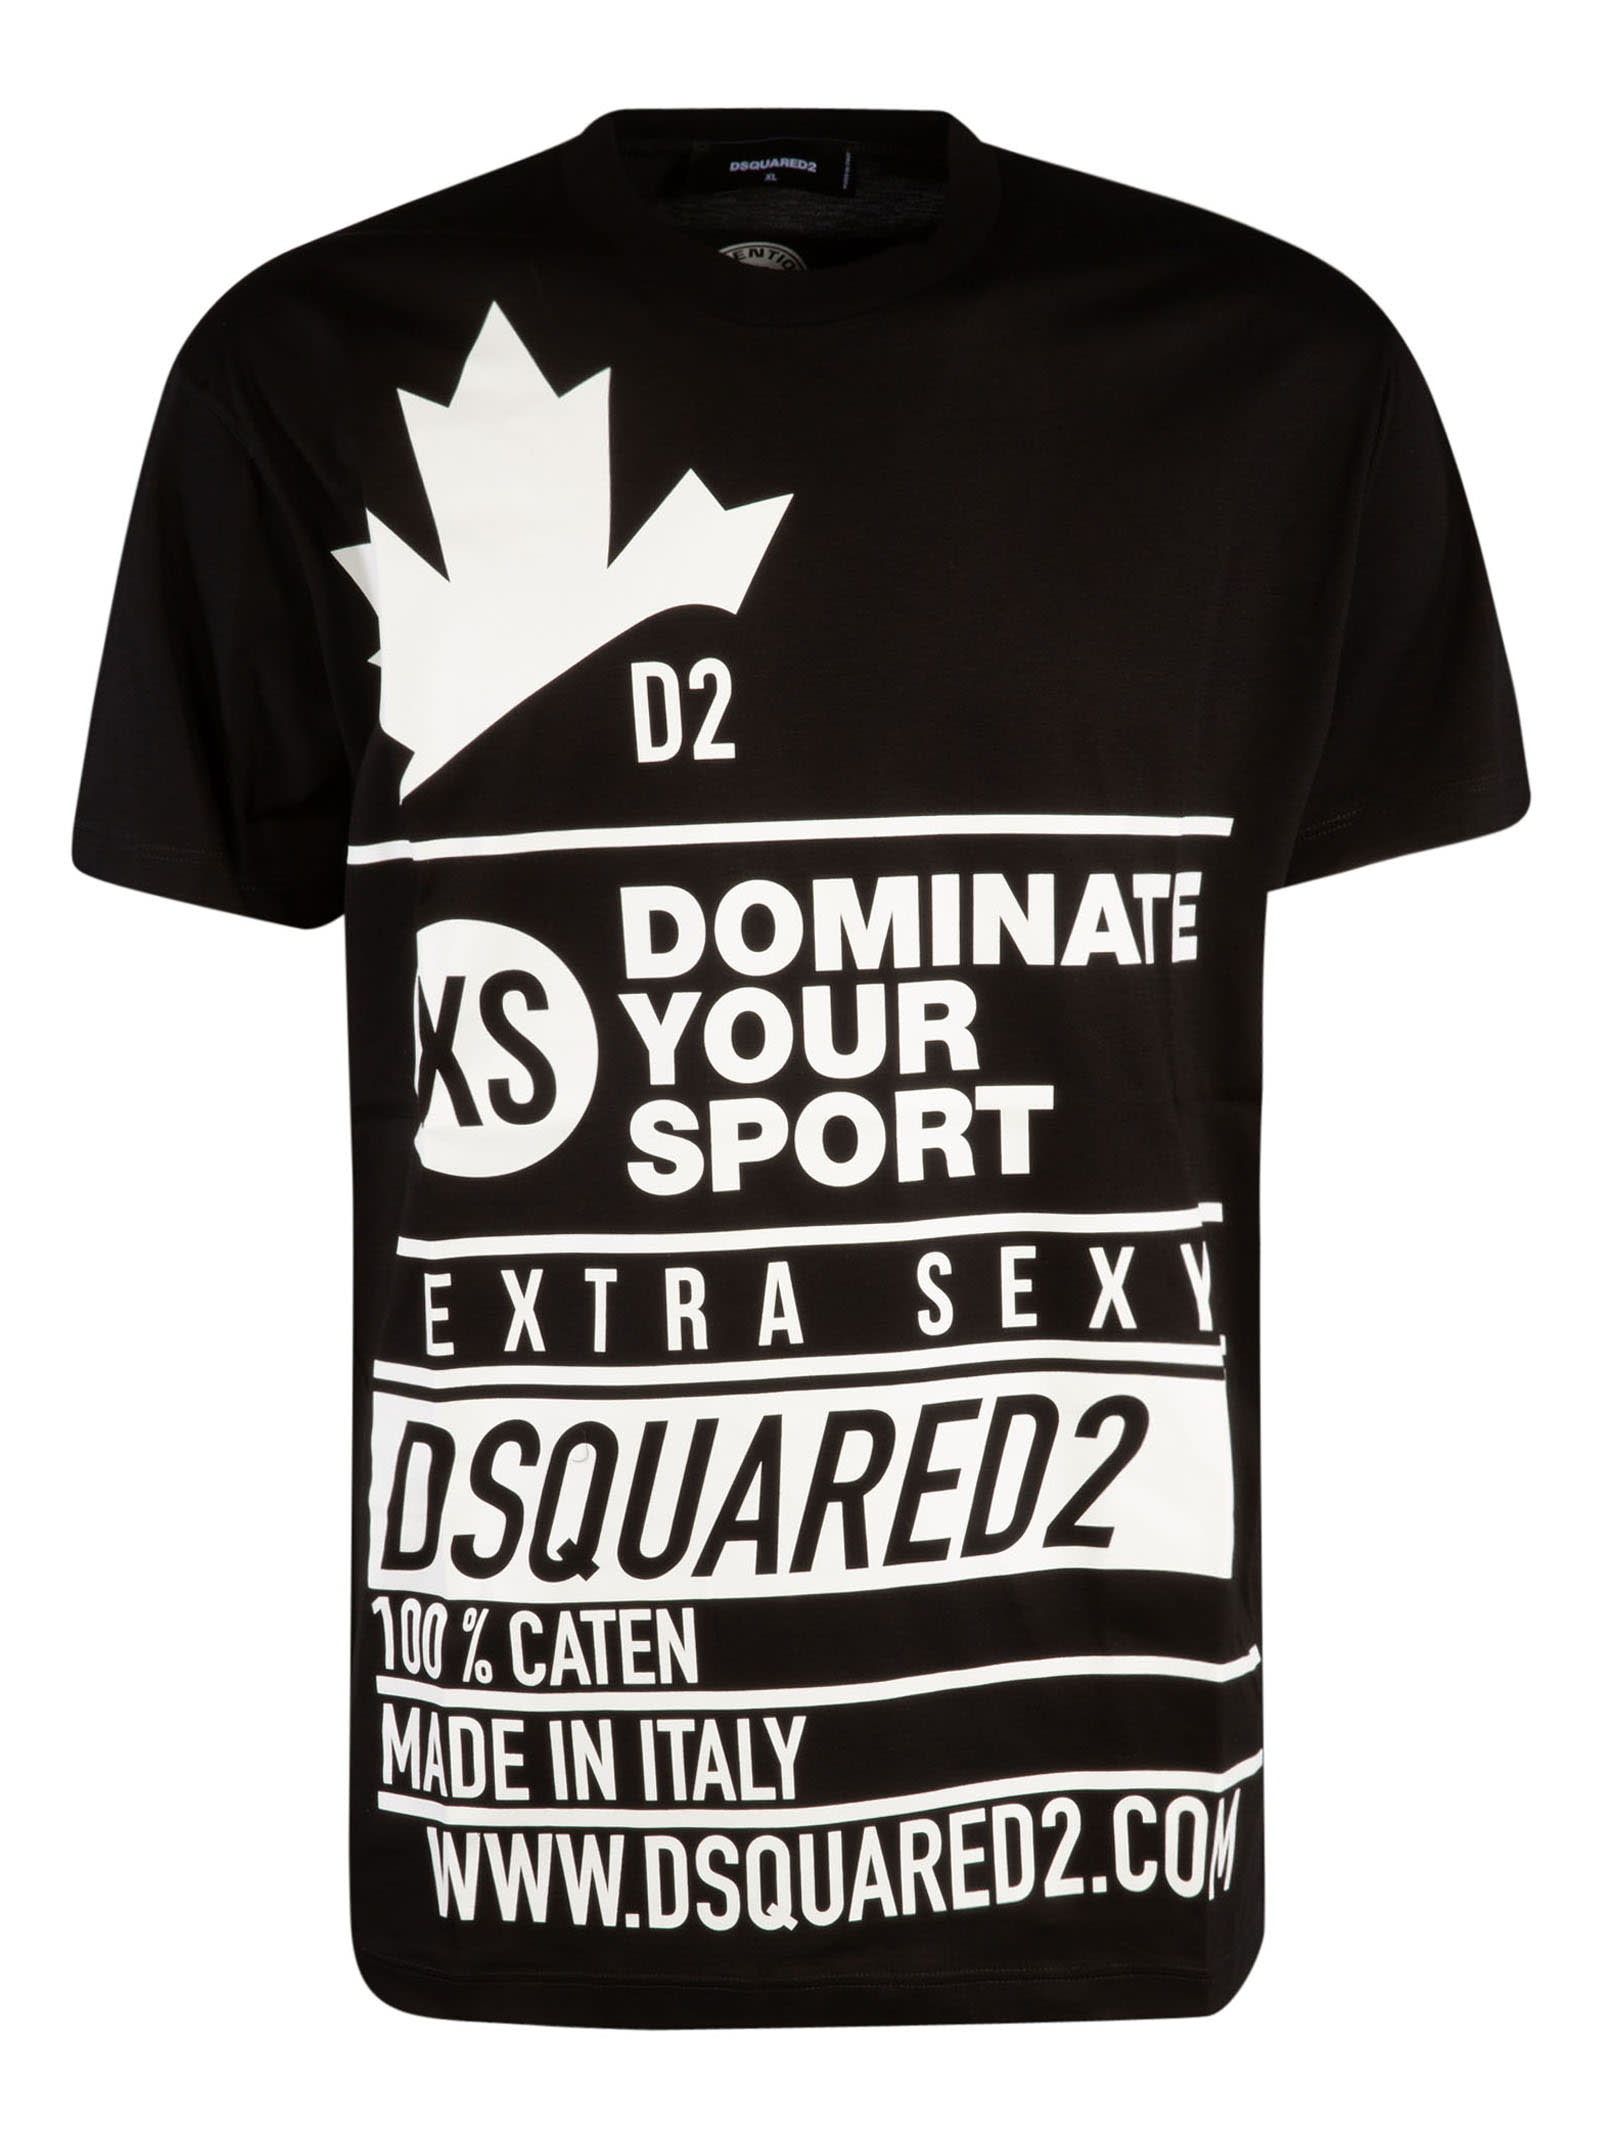 Dsquared2 Dominate Your Sport T-shirt